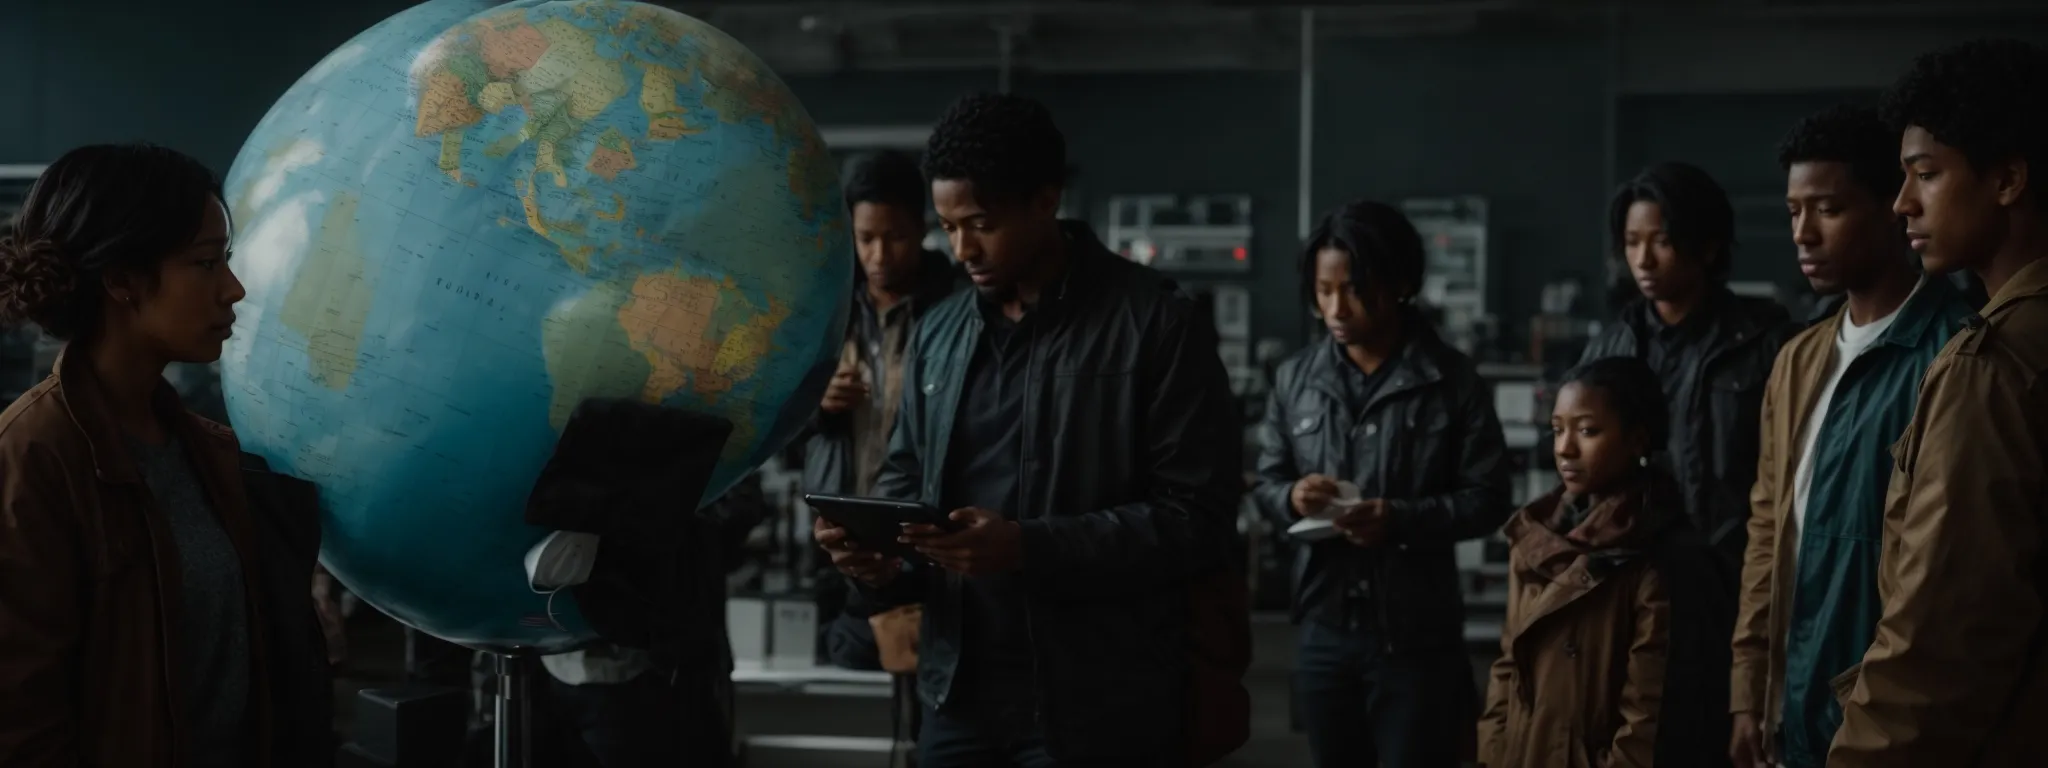 a diverse group of people stand around a globe, each with a digital tablet displaying search data.